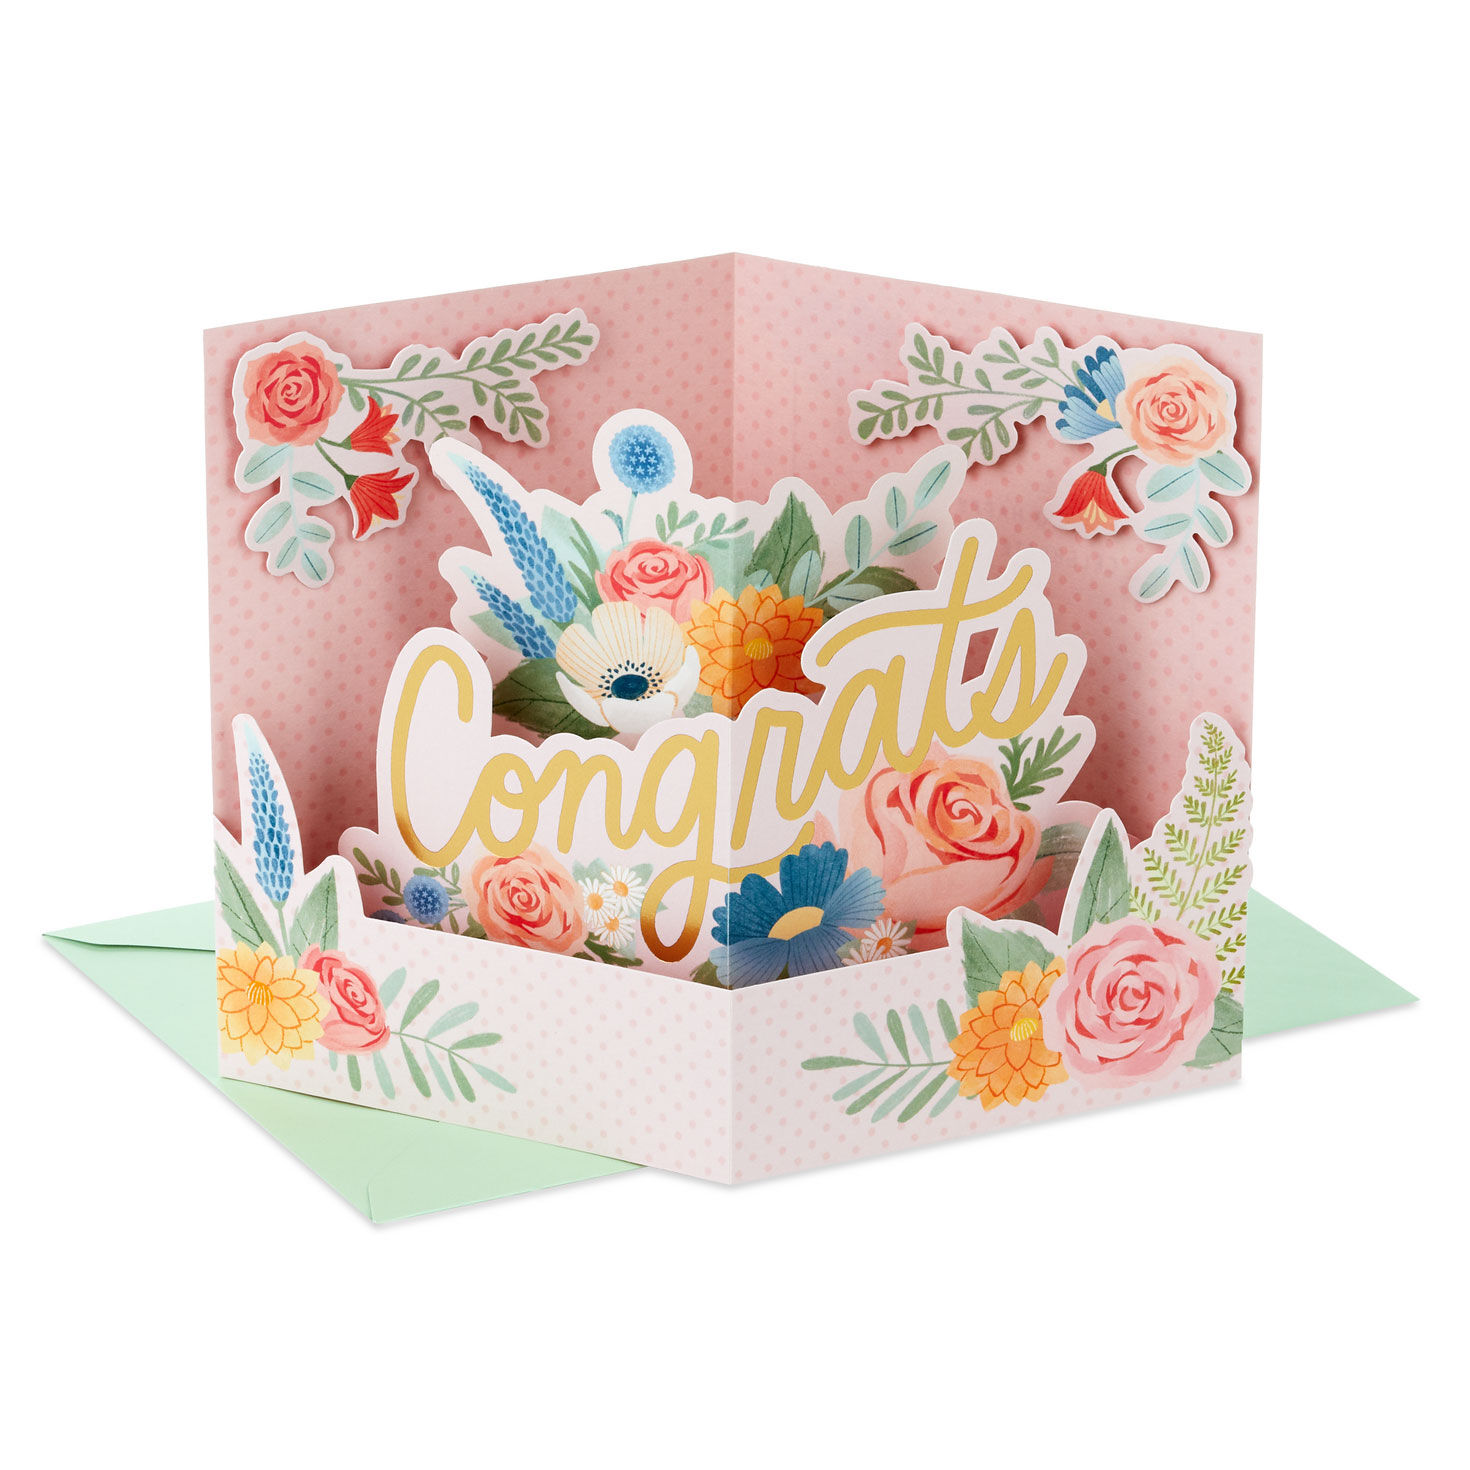 Celebrating Your Love 3D Pop-Up Wedding Card for only USD 6.99 | Hallmark